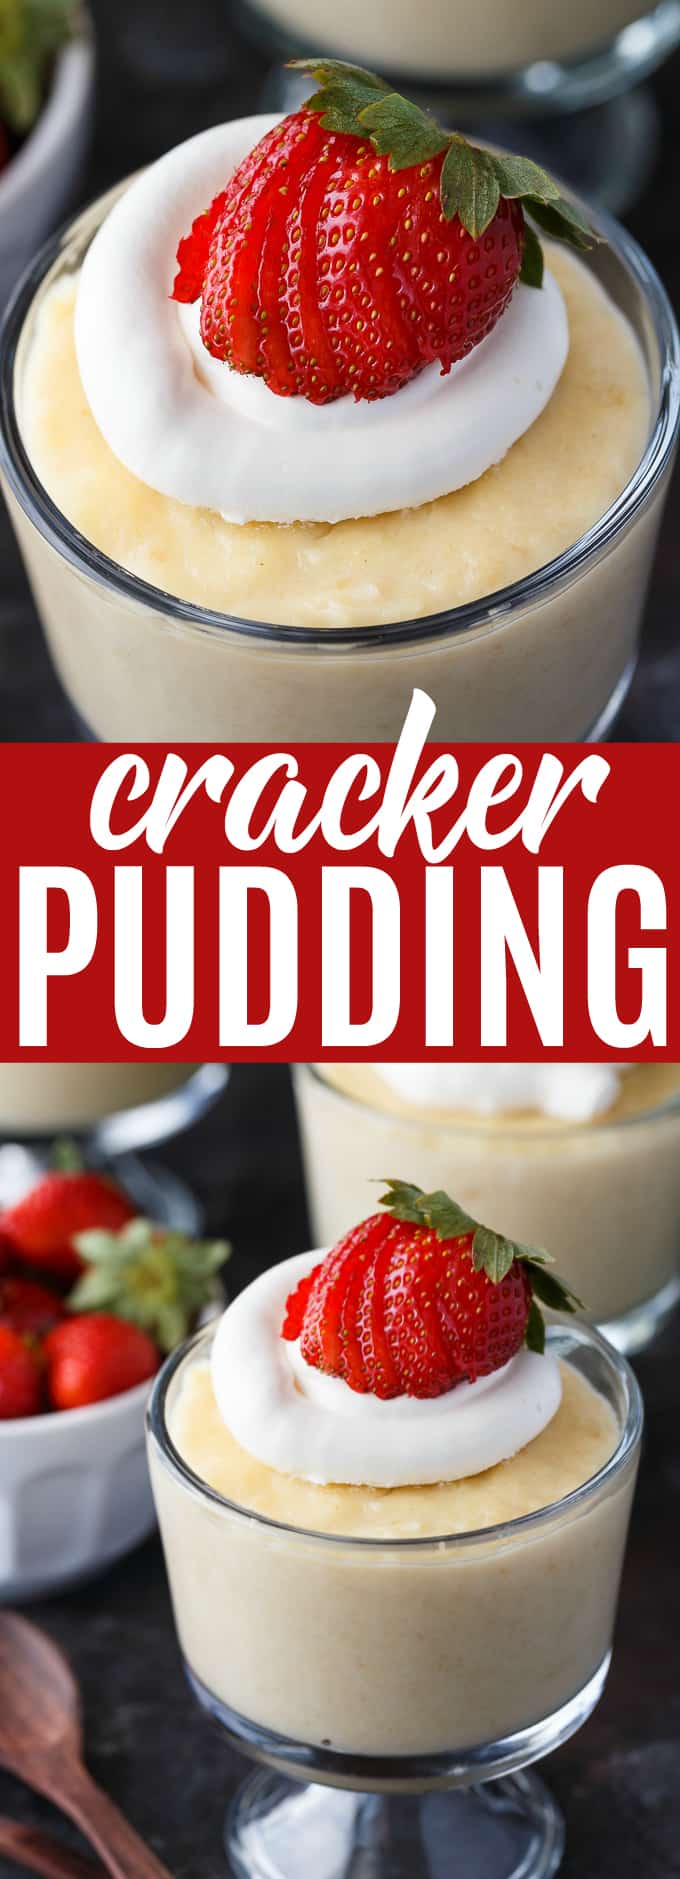 Cracker Pudding - This creamy pudding screams coconut pie filling. Made with just milk, soda crackers, eggs, vanilla and coconut! A vintage Pennsylvania Dutch dessert recipe.